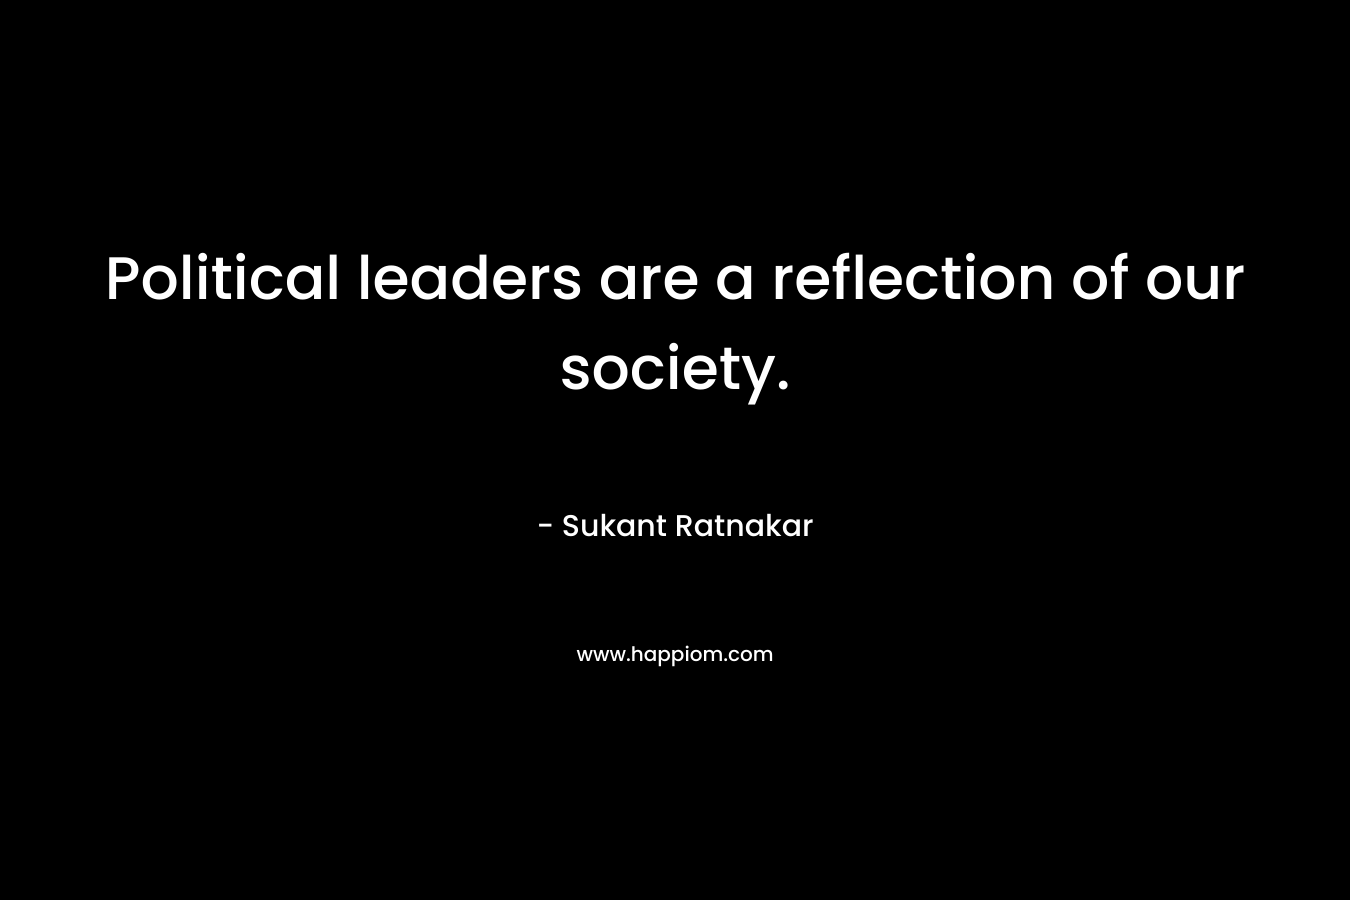 Political leaders are a reflection of our society.